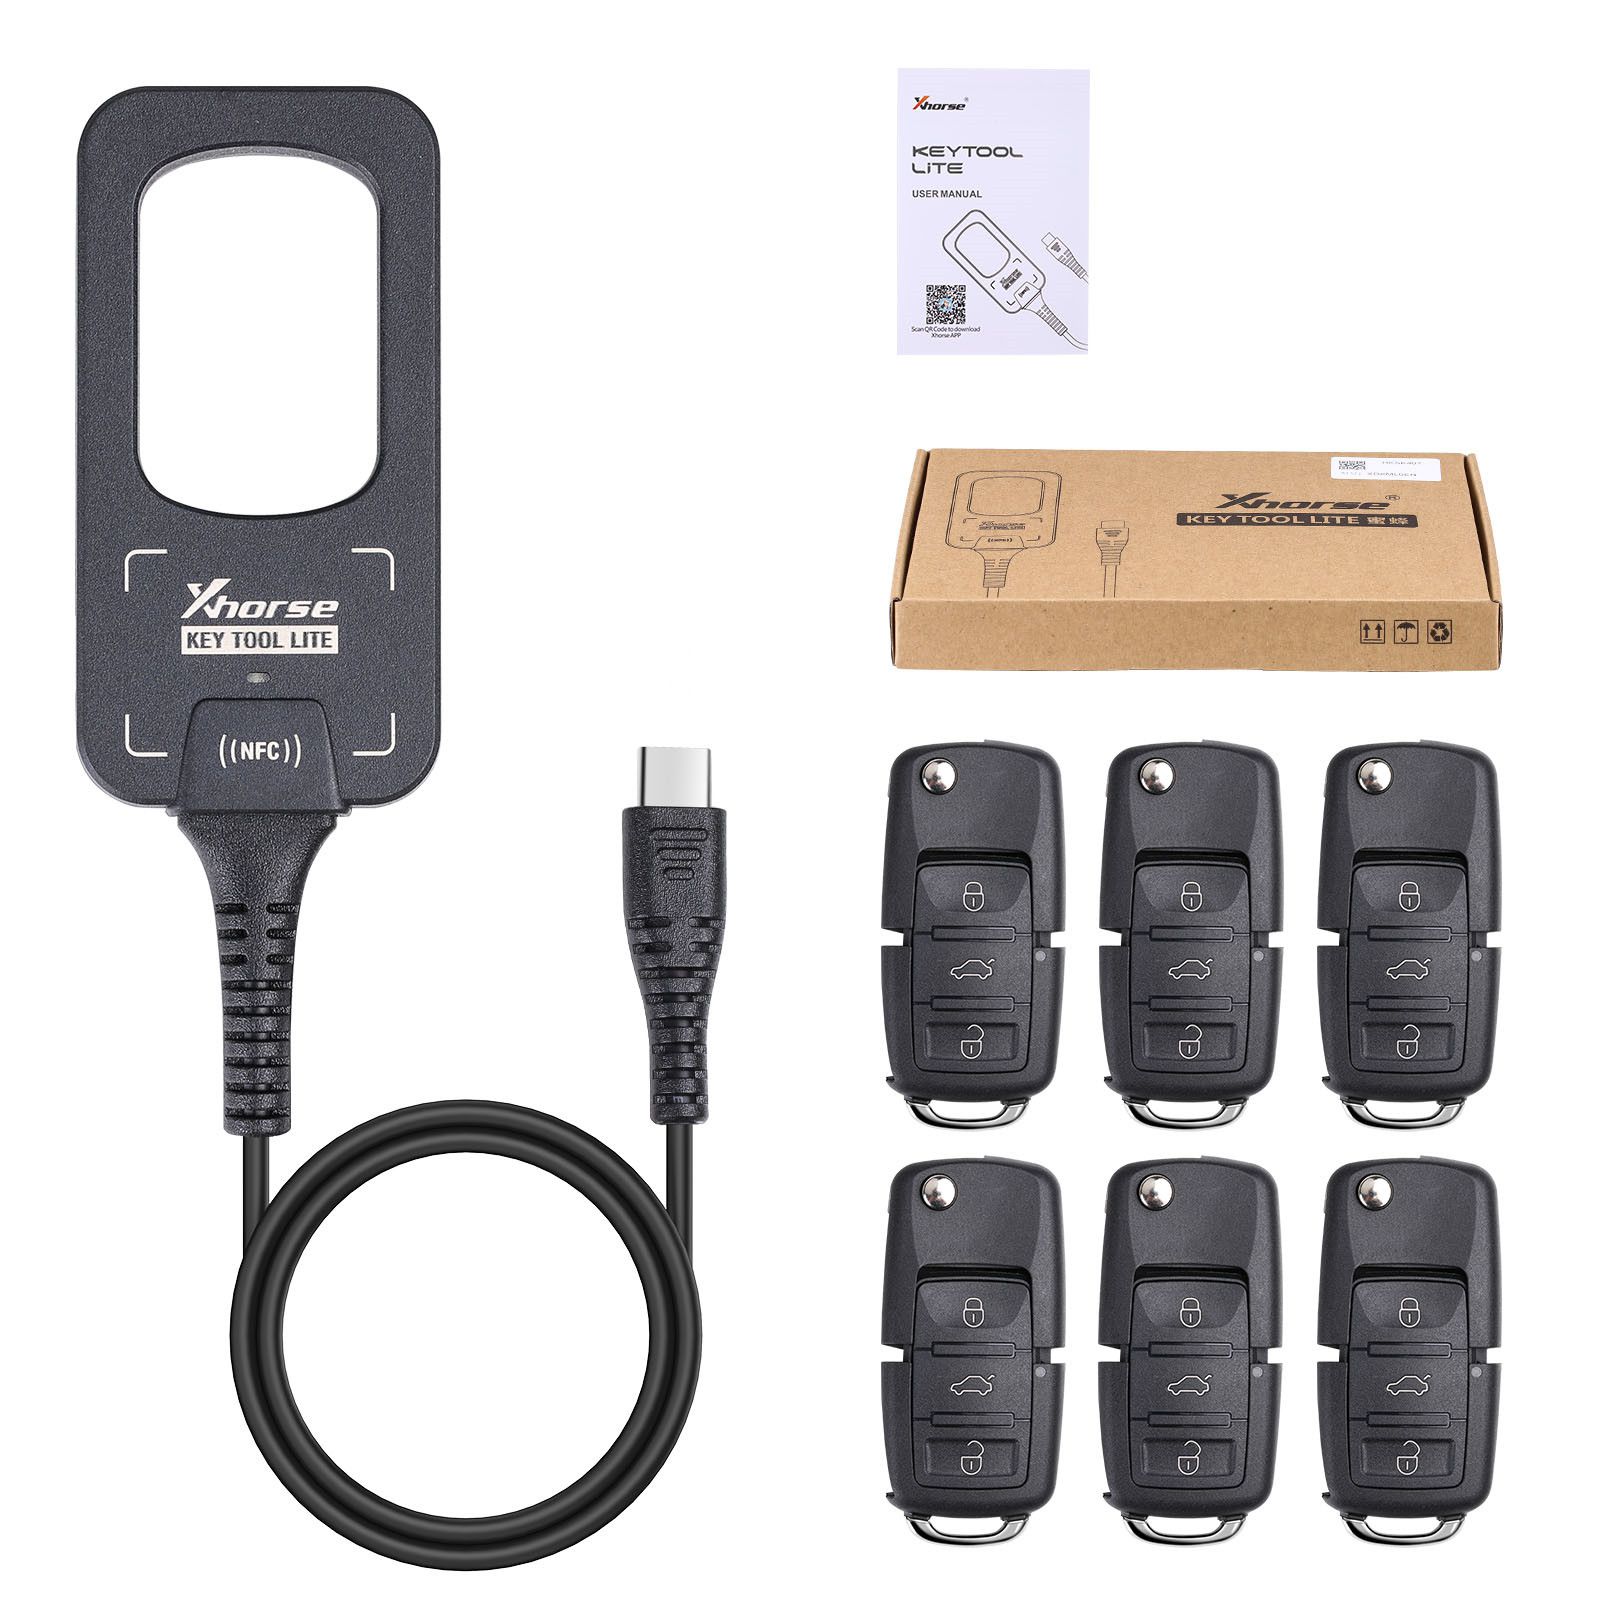 2023 Xhorse VVDI BEE Key Tool Lite Frequency Detection Transponder Clone Work on Android Phone Get Free 6pcs XKB501EN Remotes